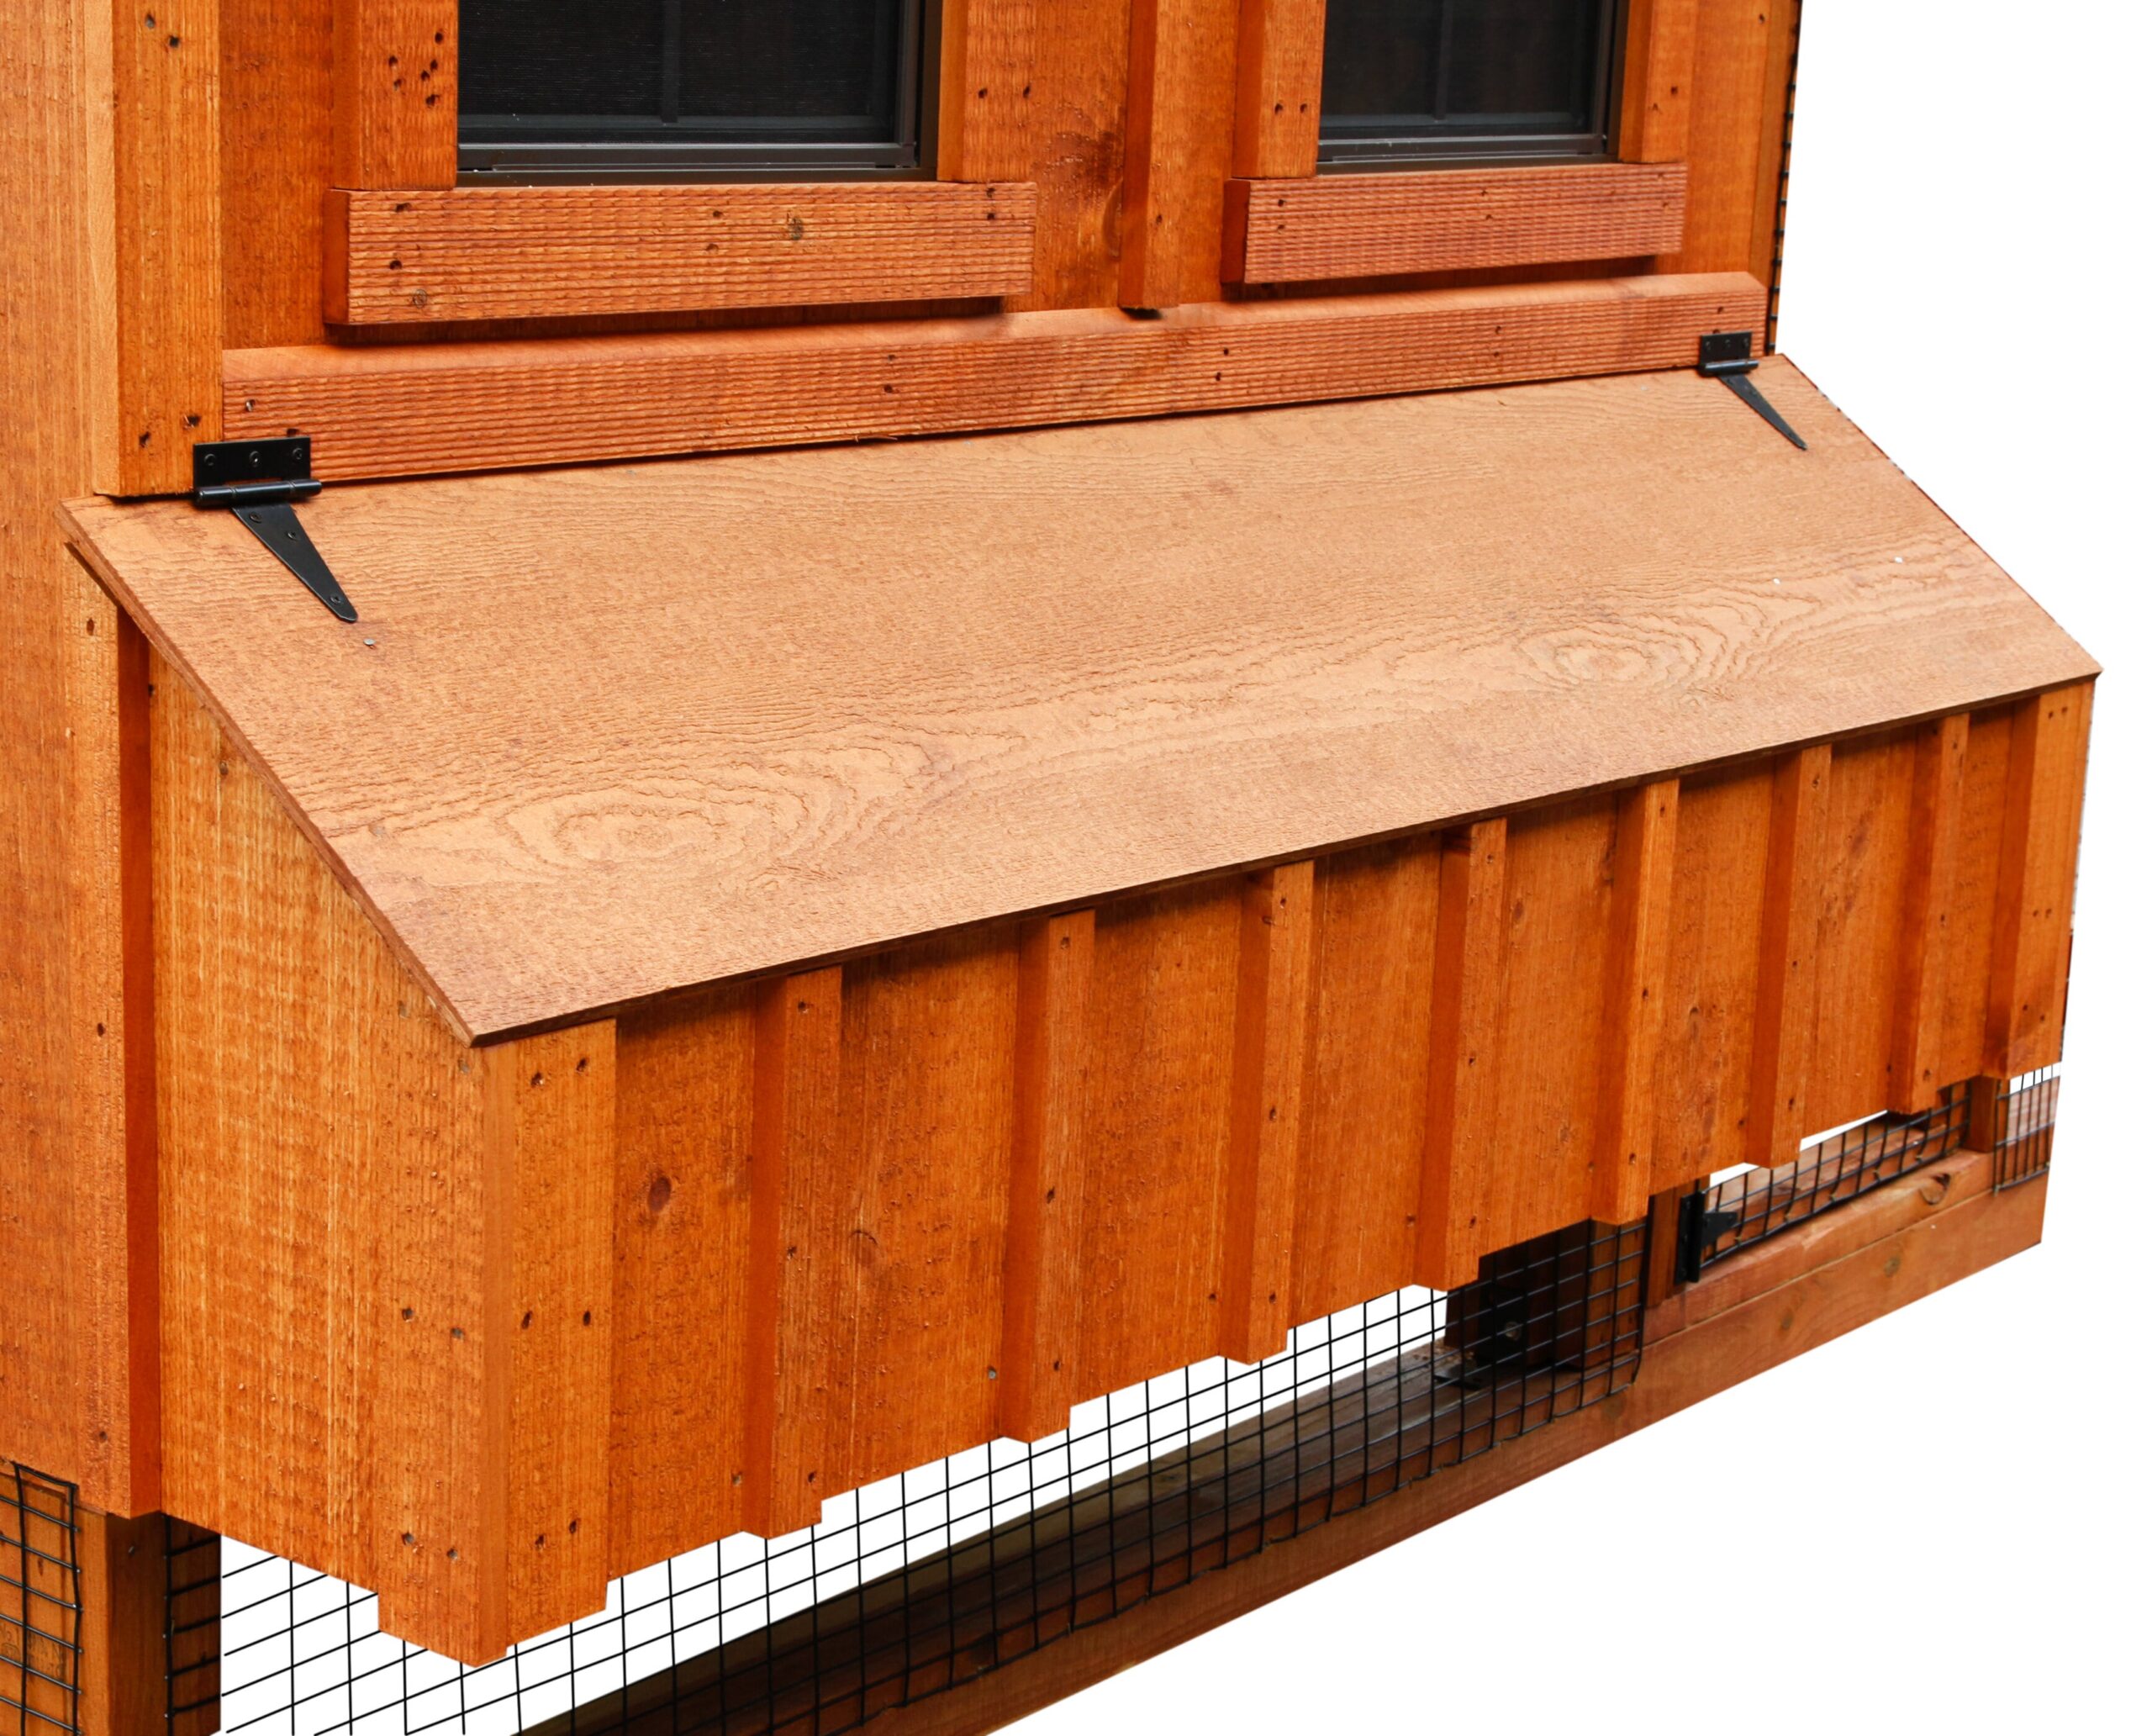 Close up of exterior of a 6x12 Quaker Combination chicken coop